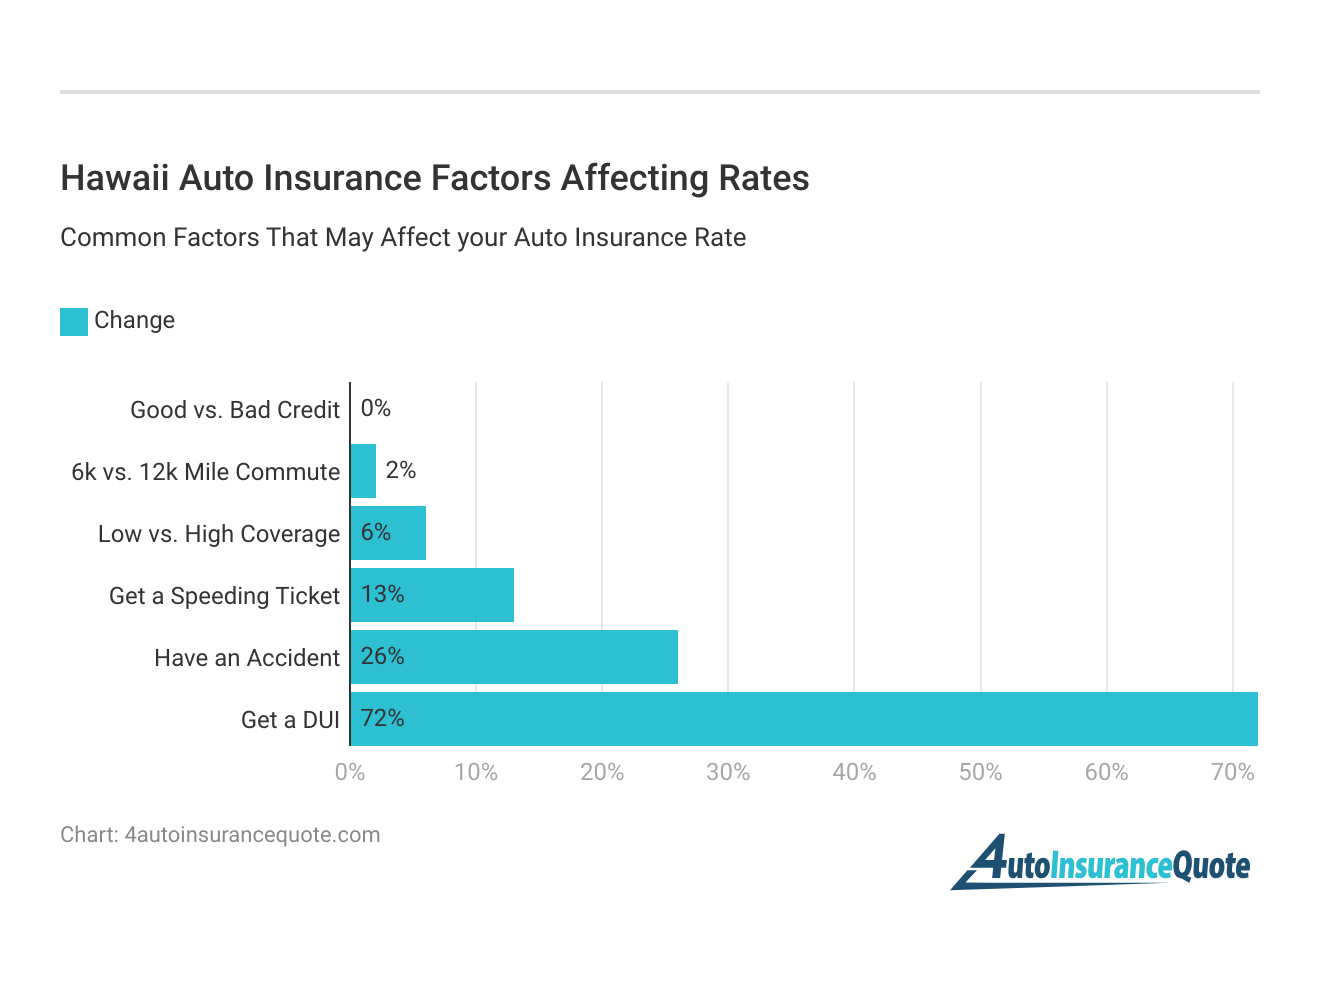 <h3>Hawaii Auto Insurance Factors Affecting Rates</h3>